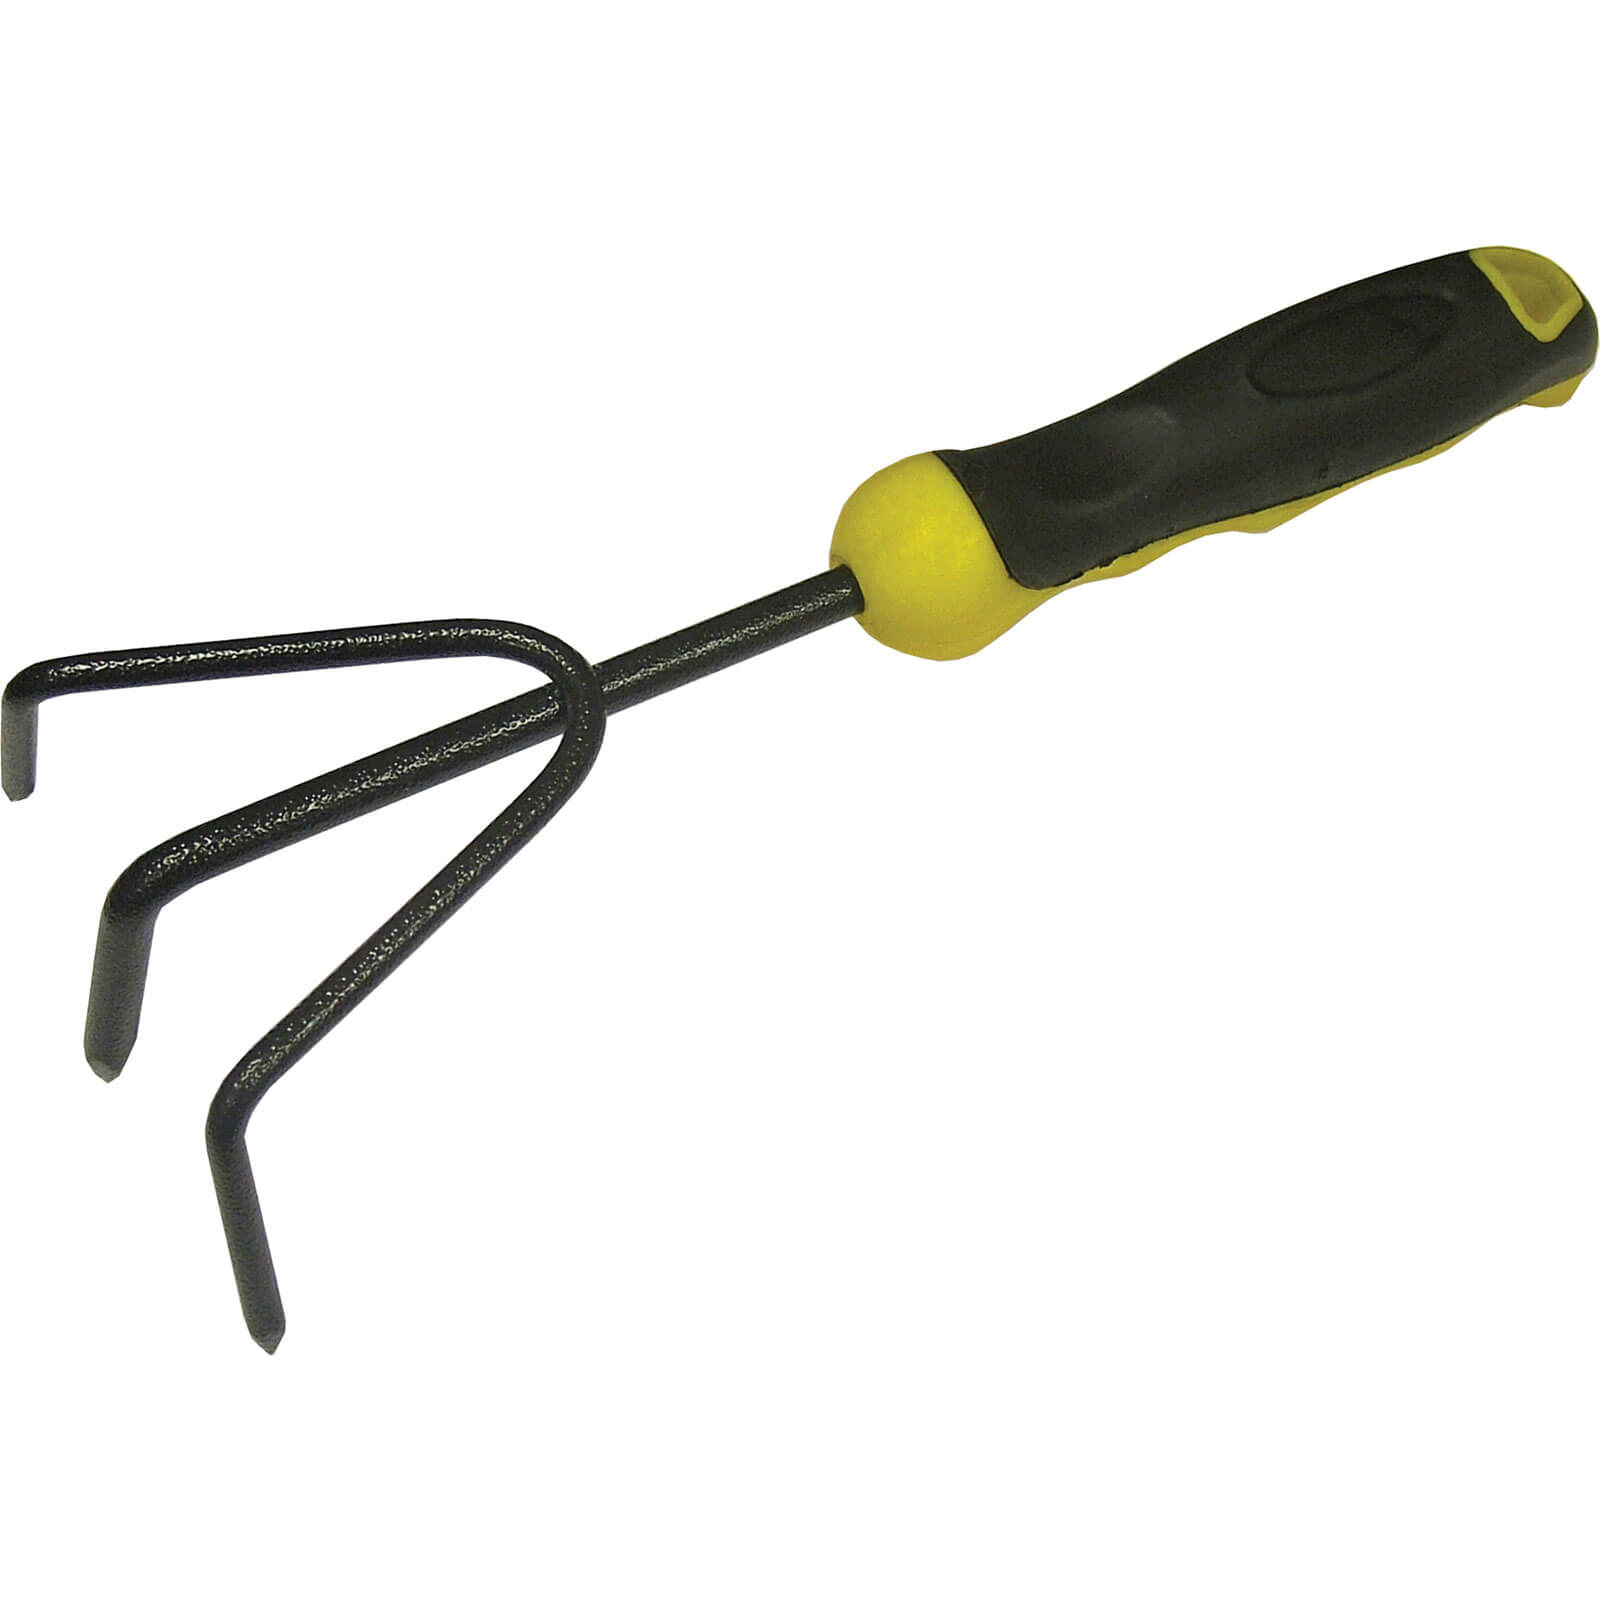 Faithfull 3 Prong Hand Cultivator with Soft Handle